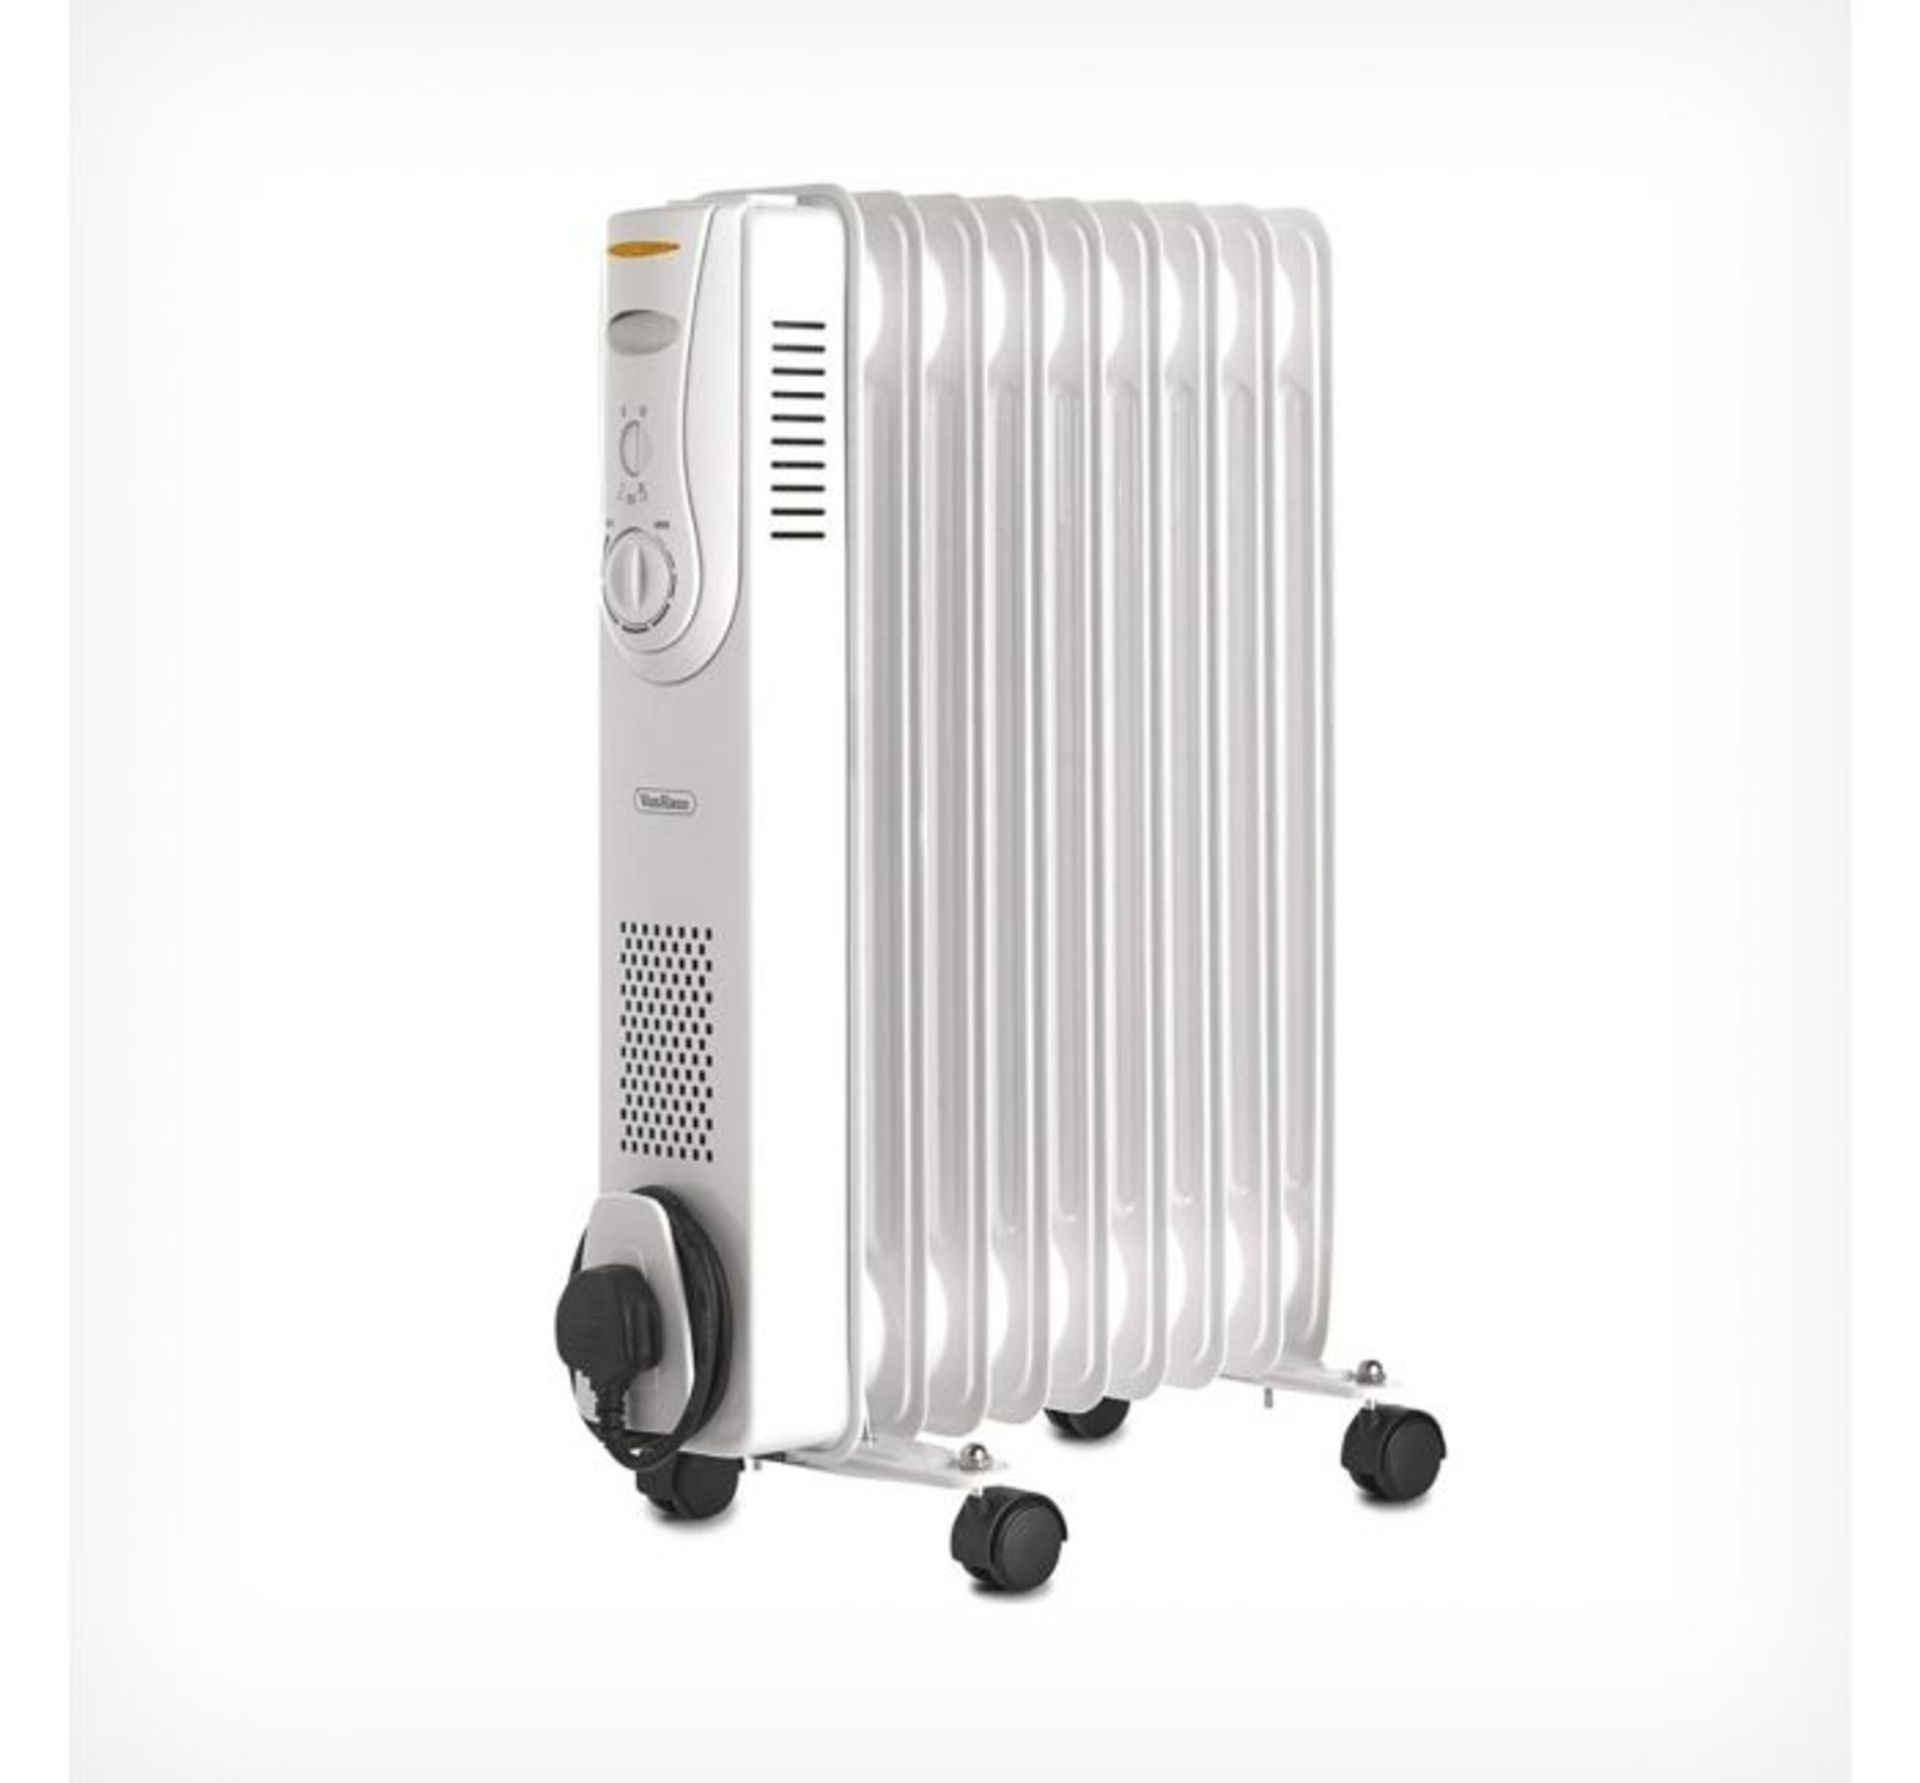 (D6) 9 Fin 2000W Oil Filled Radiator - White Equipped with 3 heat settings (800W/1200W/2000W) ... - Image 2 of 4